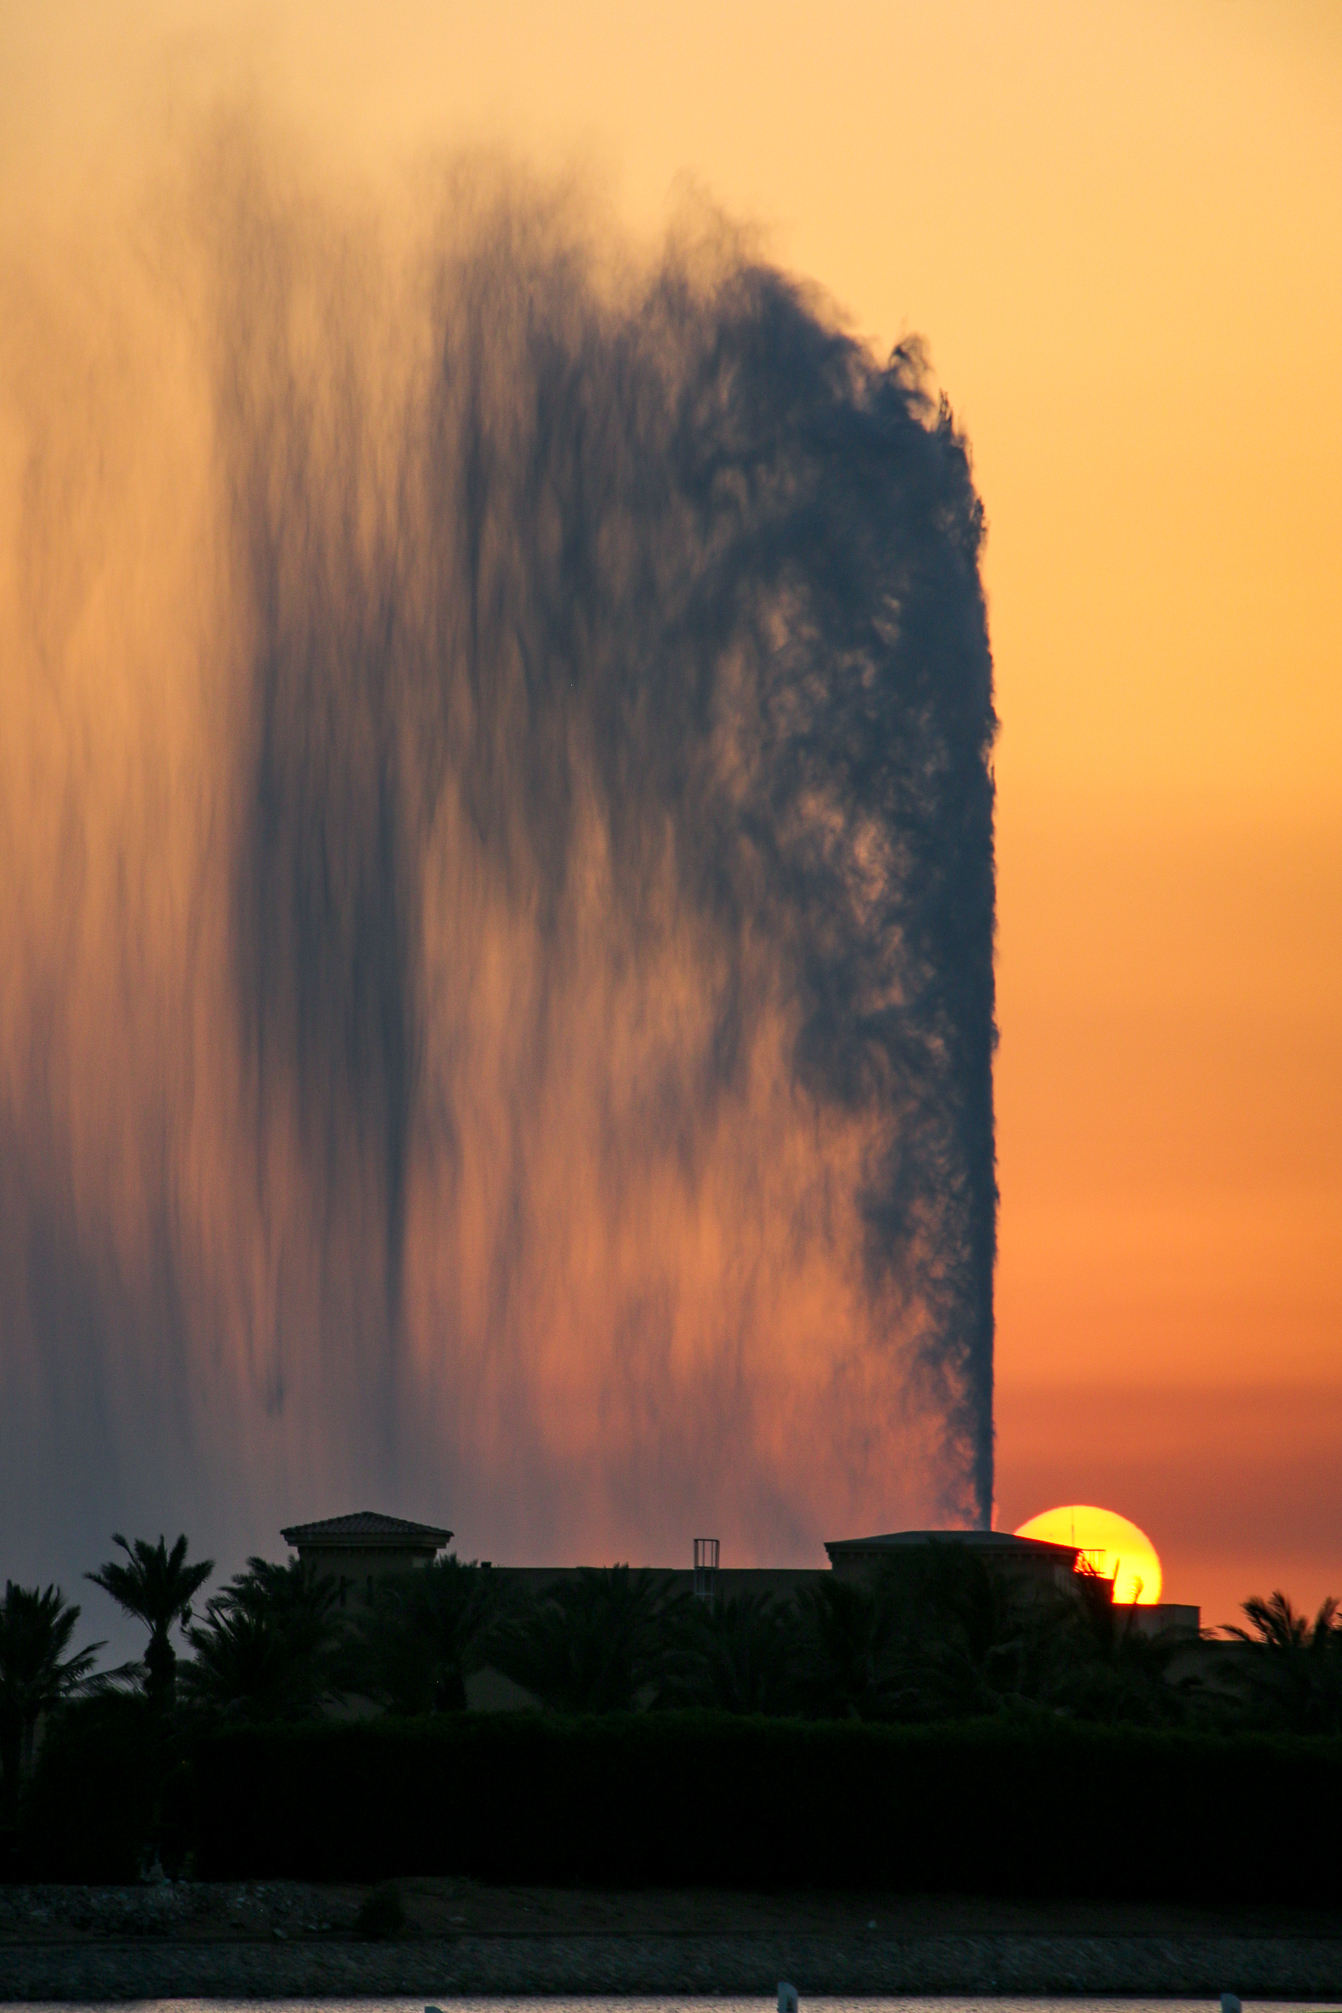 <span  class="uc_style_uc_tiles_grid_image_elementor_uc_items_attribute_title" style="color:#ffffff;">the highest water fountain (maybe in the world...): in Jeddah</span>